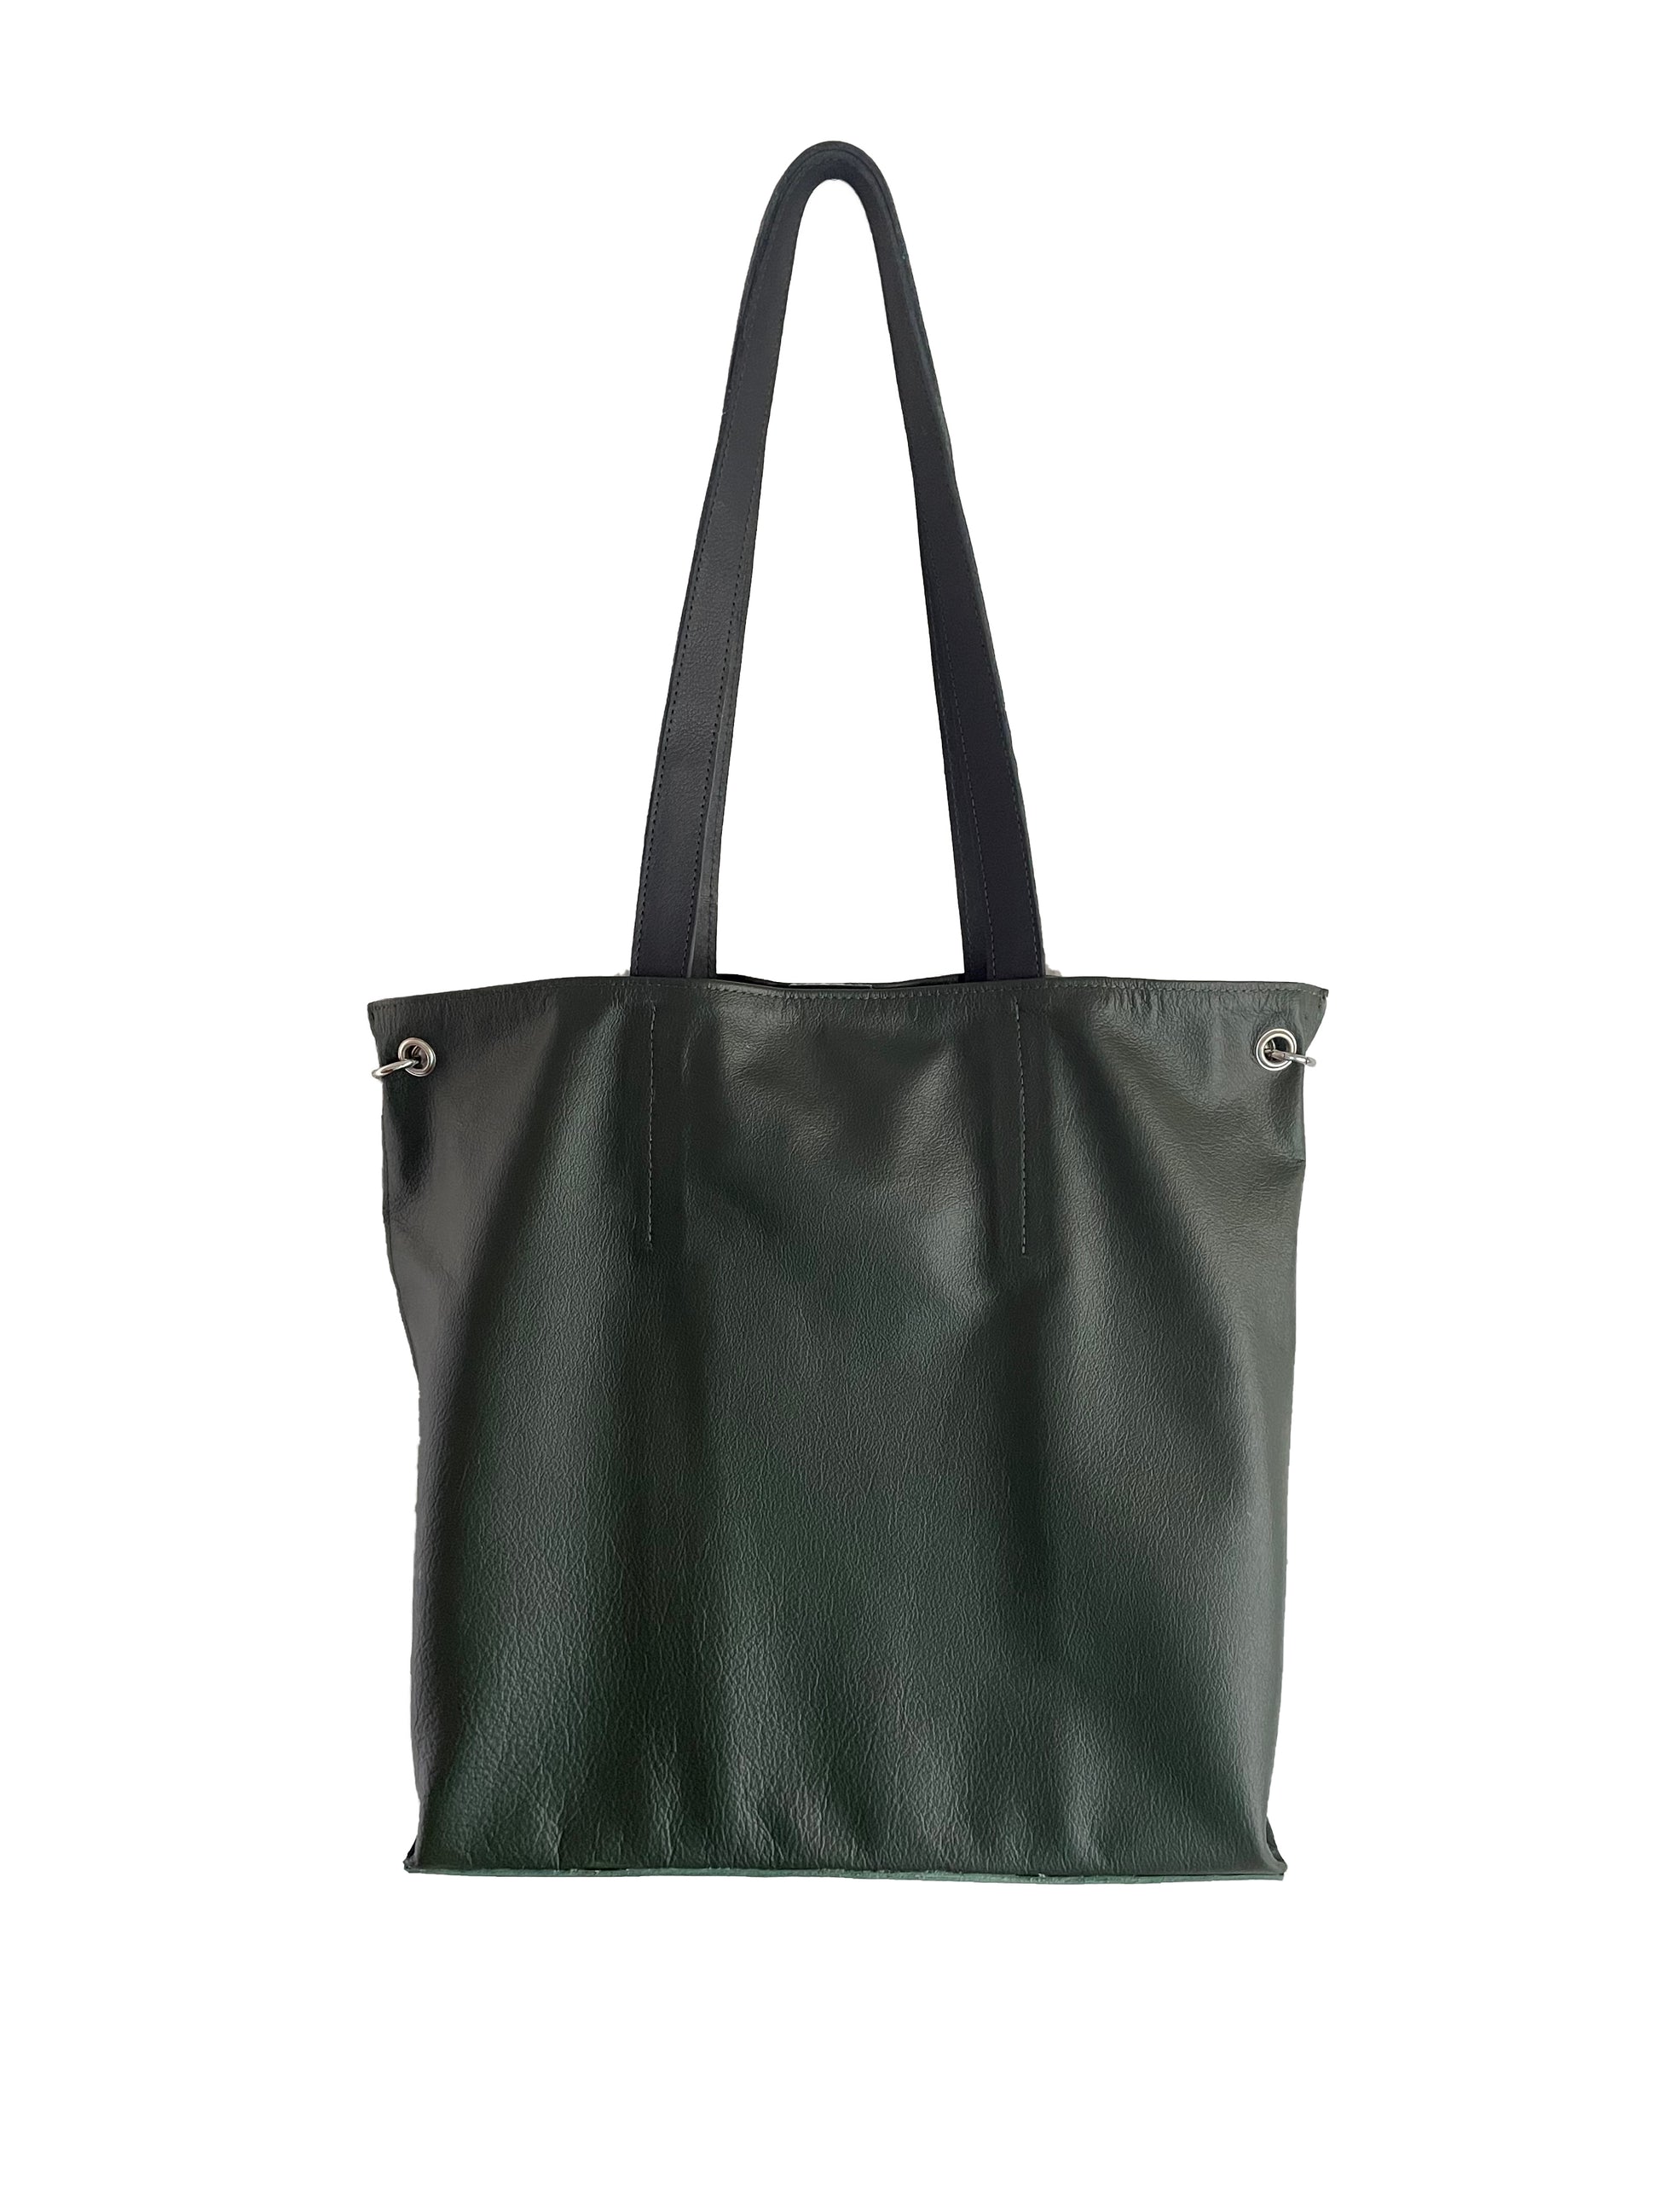 upcycling leather shopper dark green olive leather handles